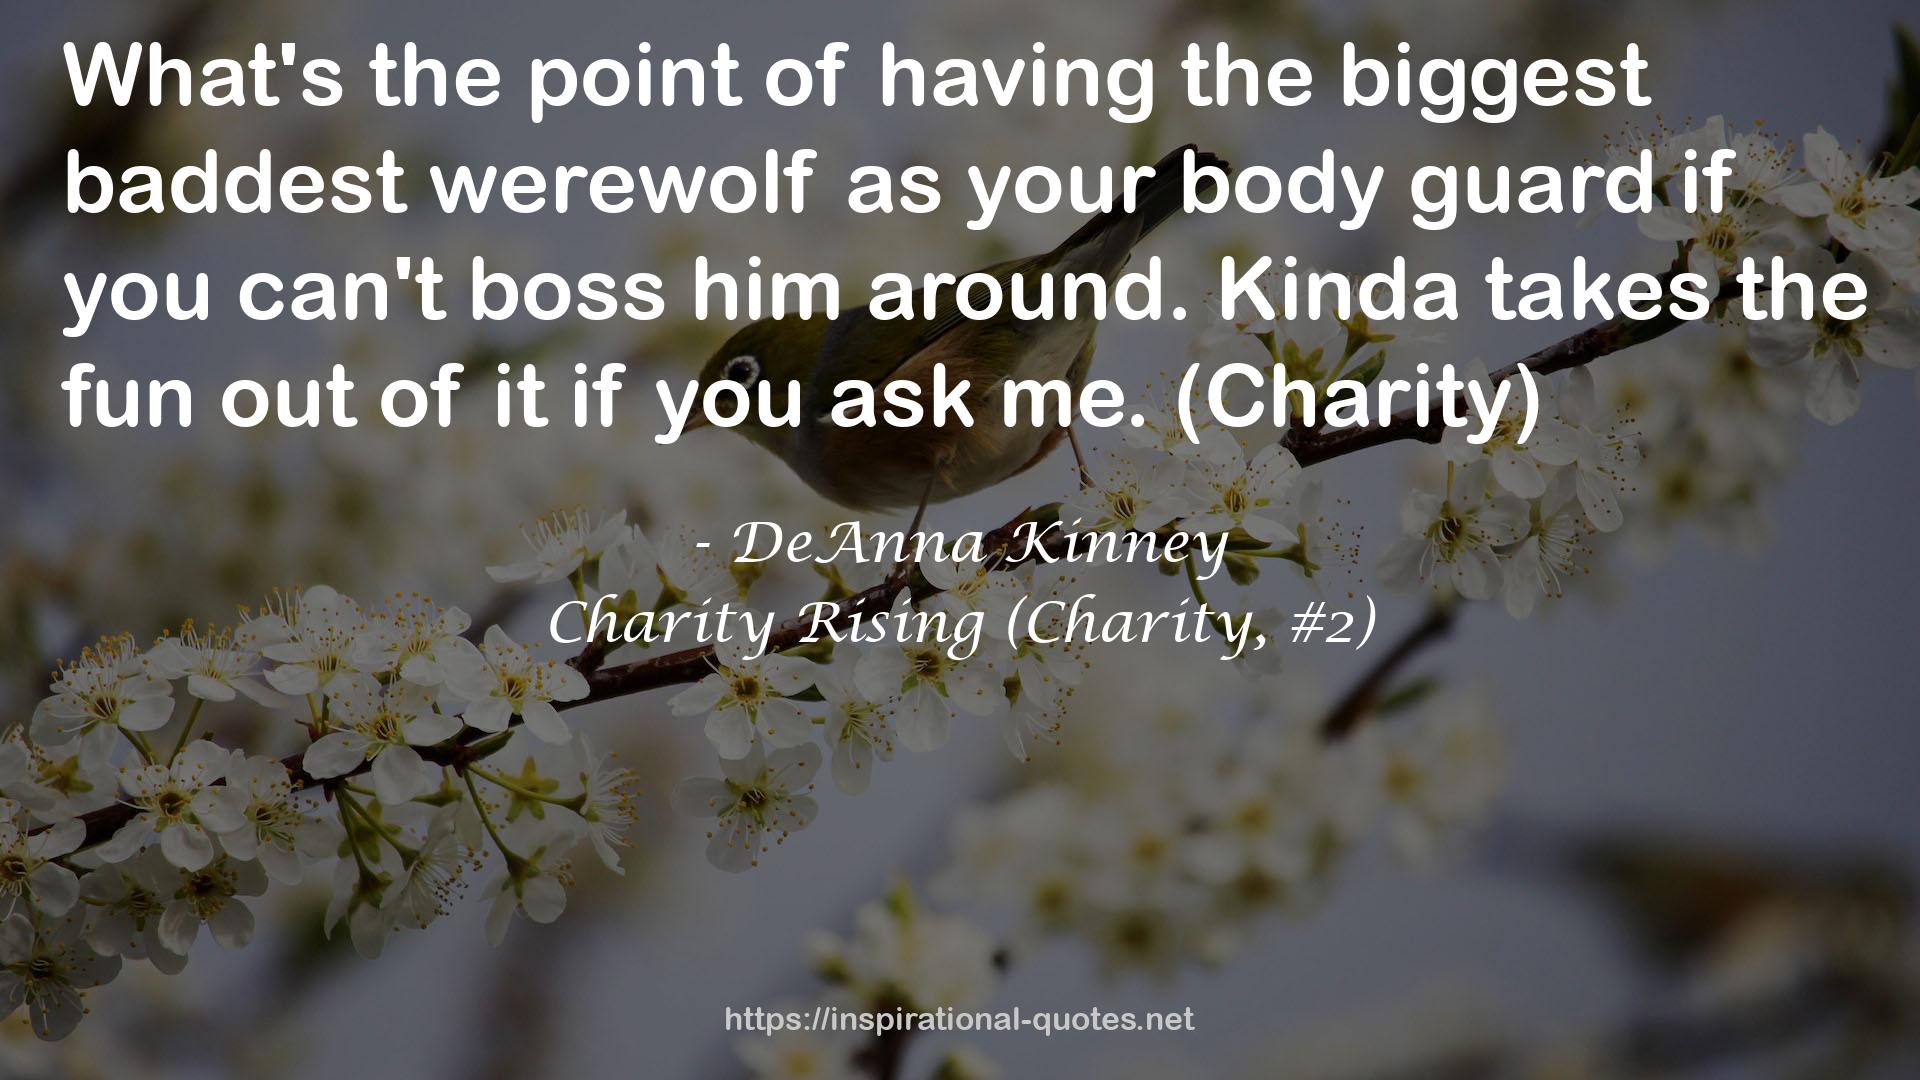 Charity Rising (Charity, #2) QUOTES